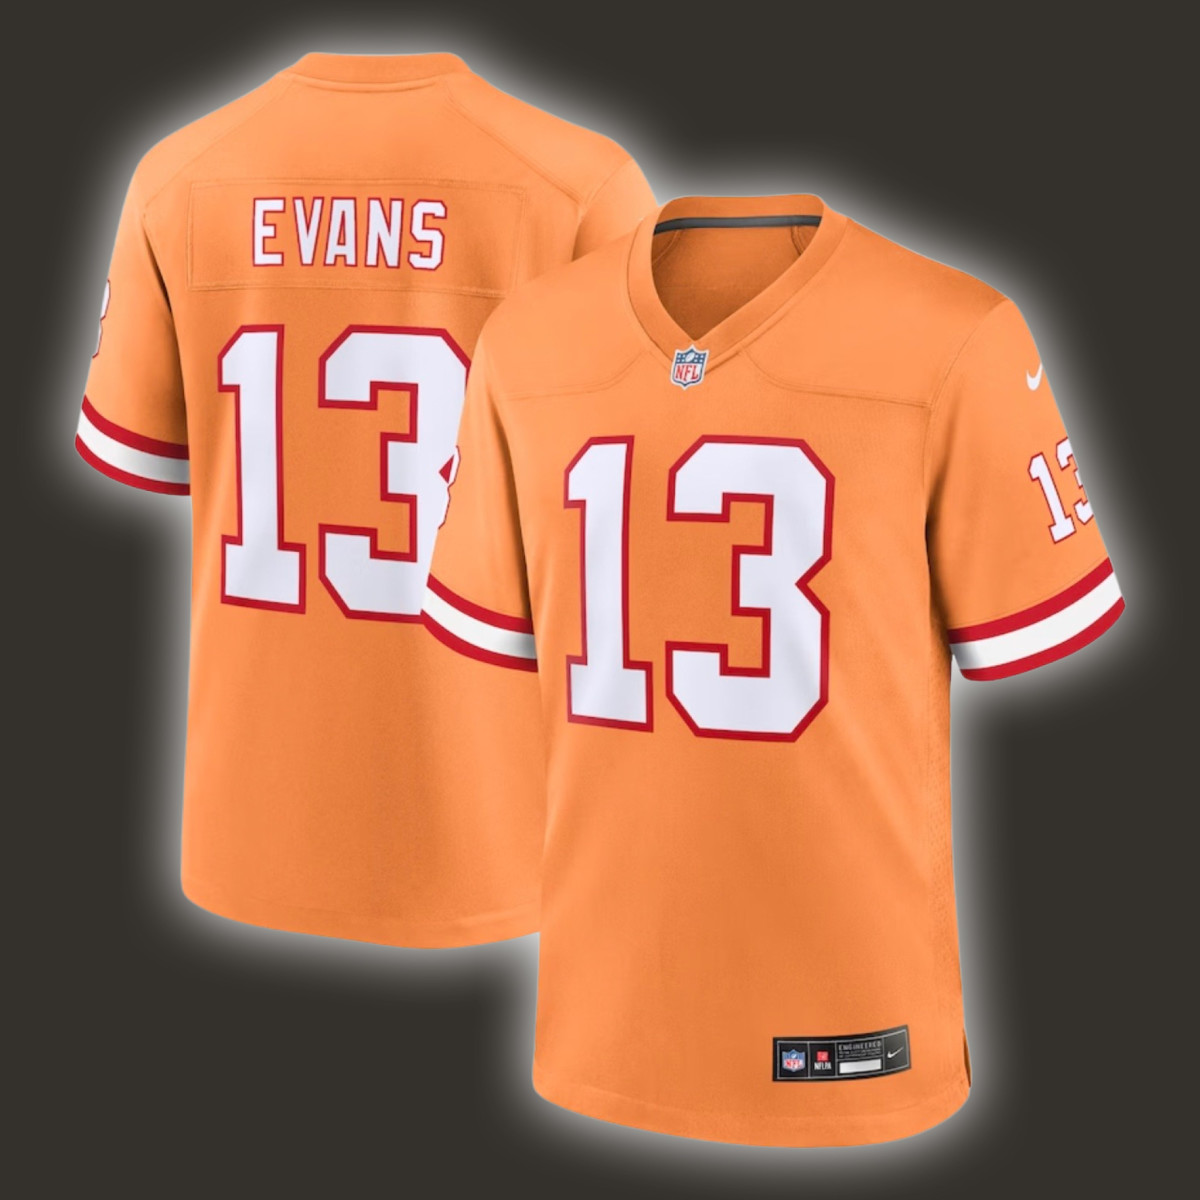 BUY NOW: Bucs Creamsicle Throwback Jerseys are Back - A to Z Sports